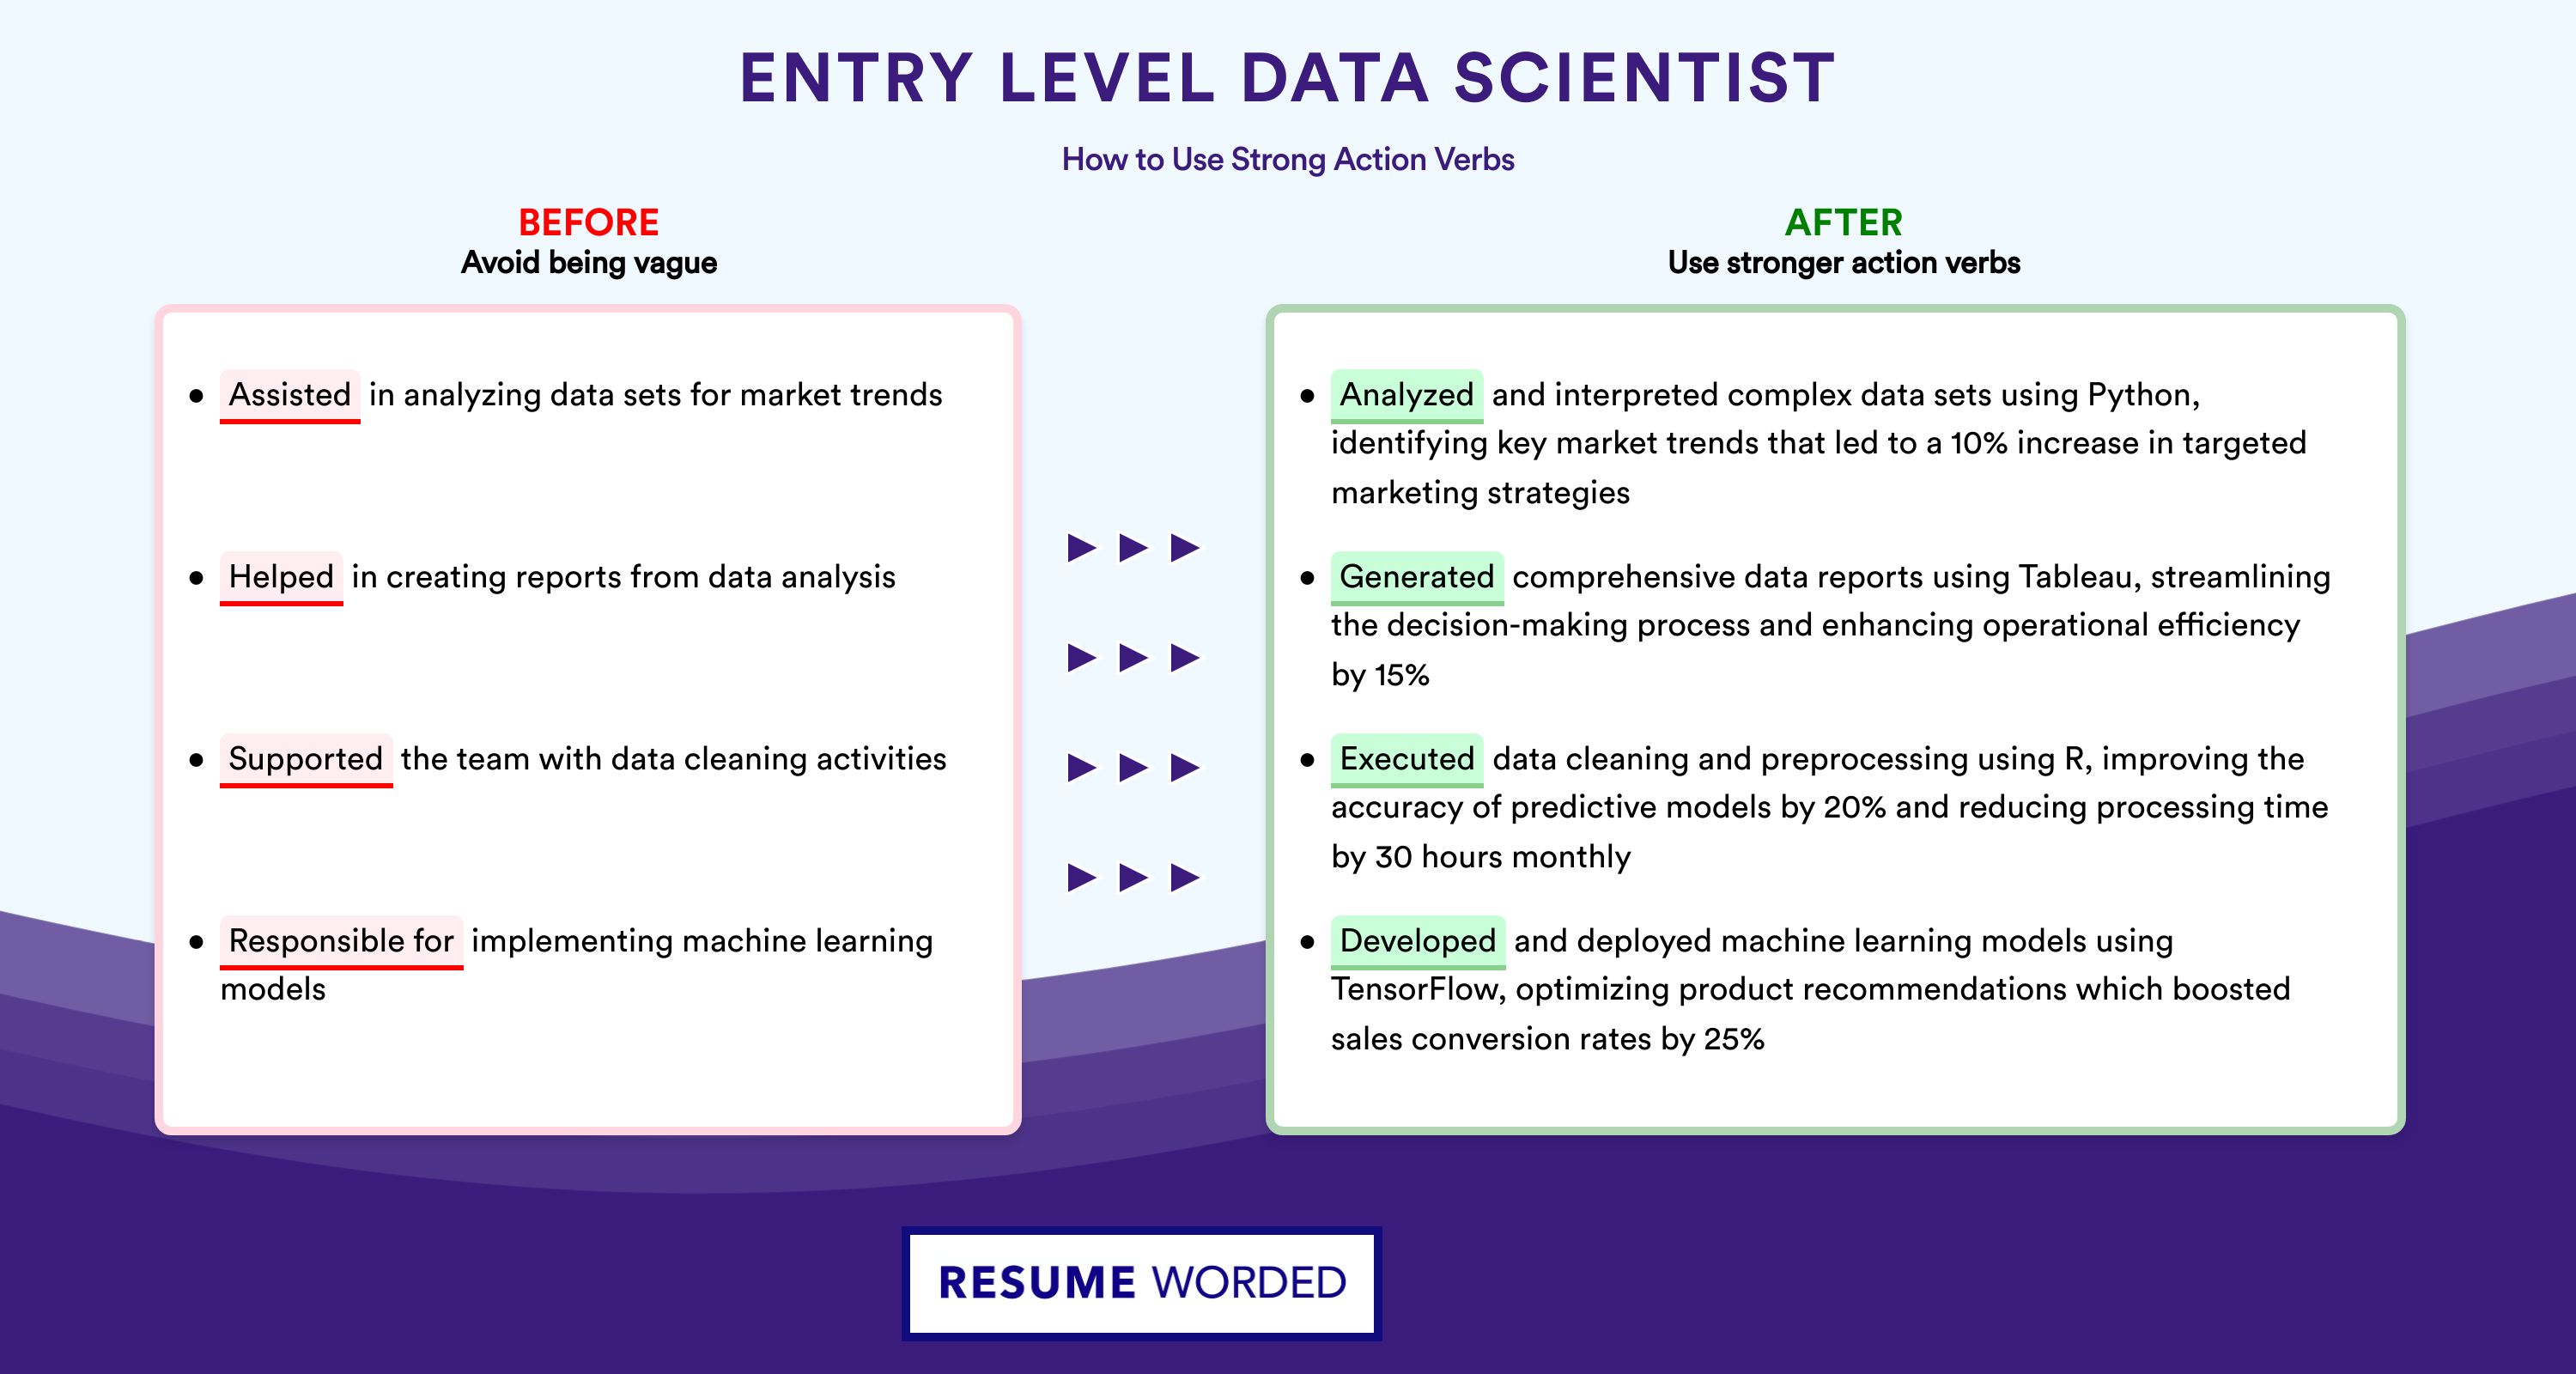 Action Verbs for Entry Level Data Scientist